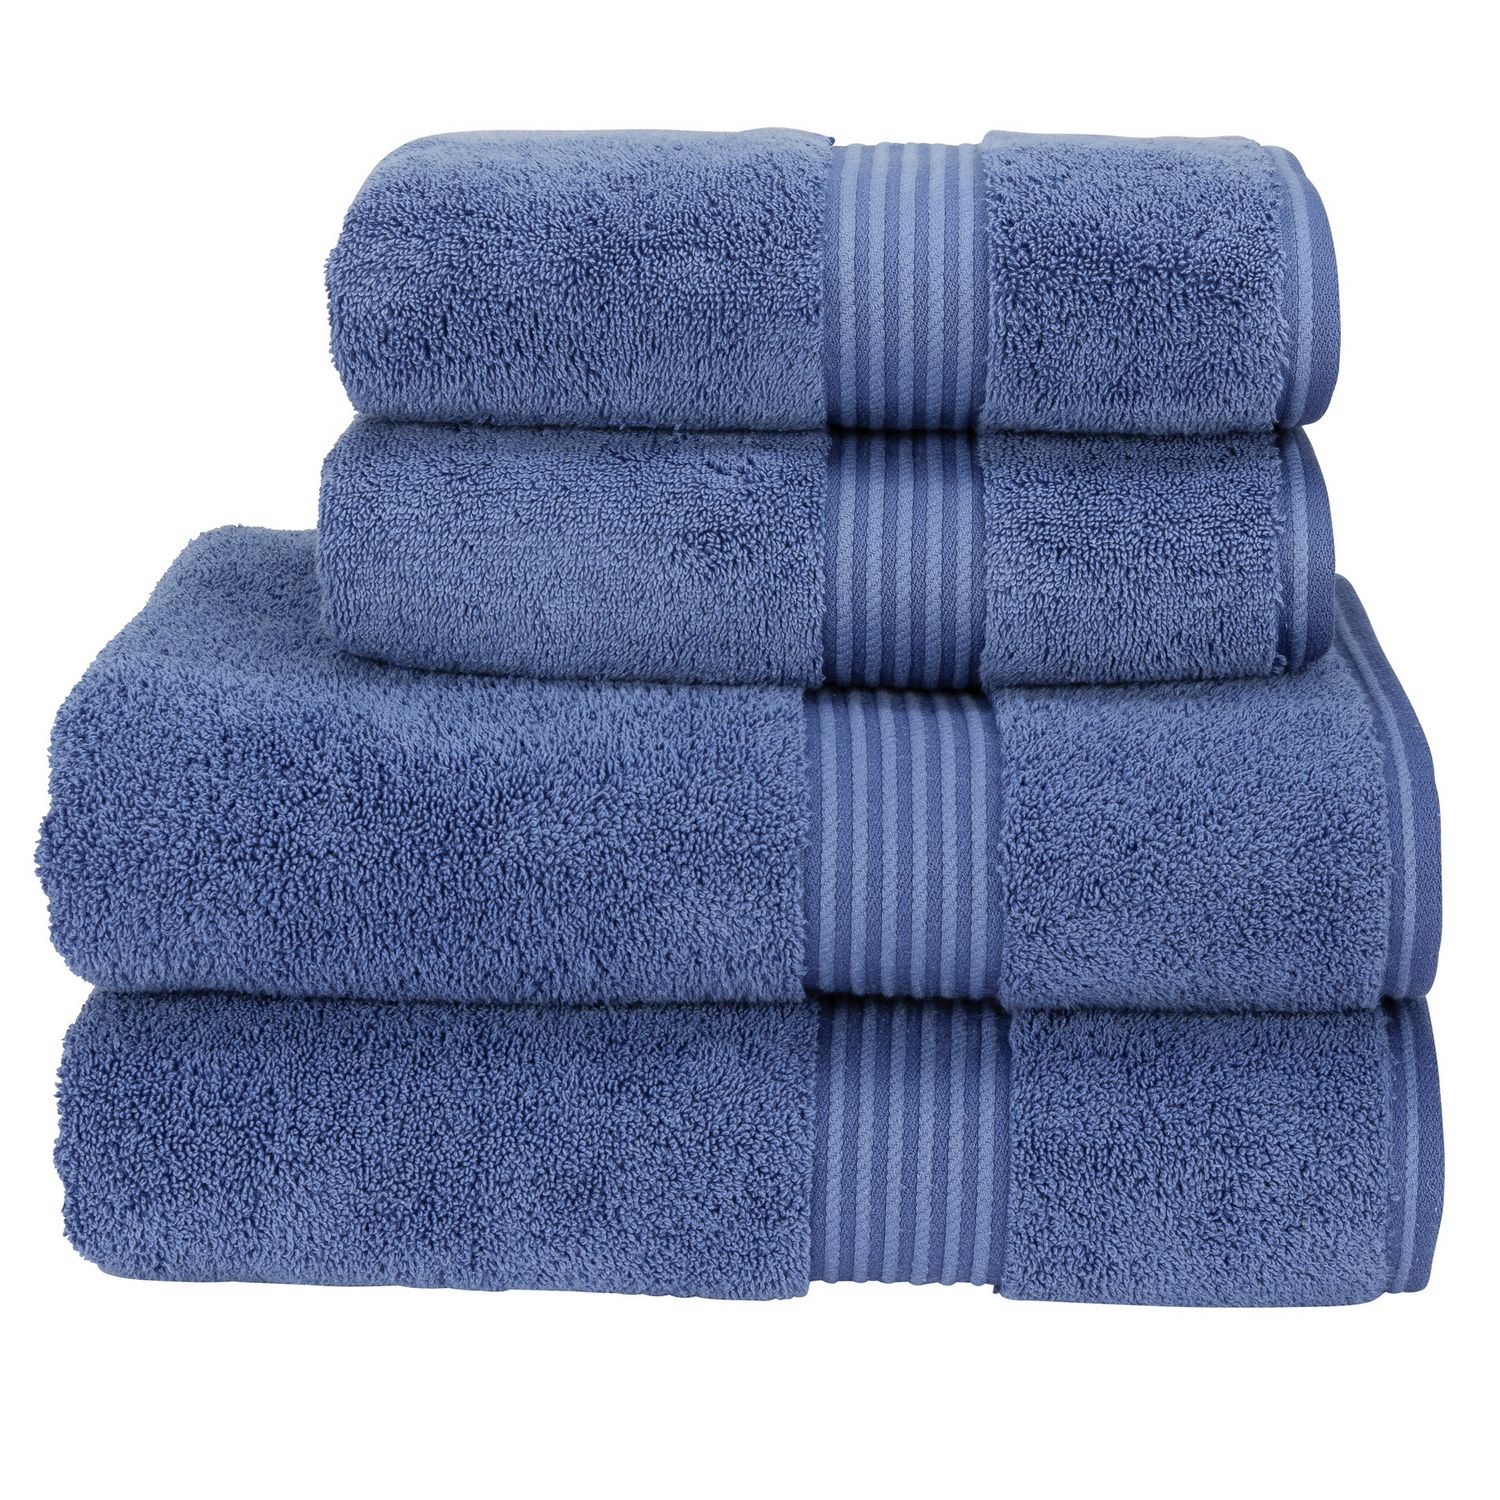 Christy Towels & Linens from Christy